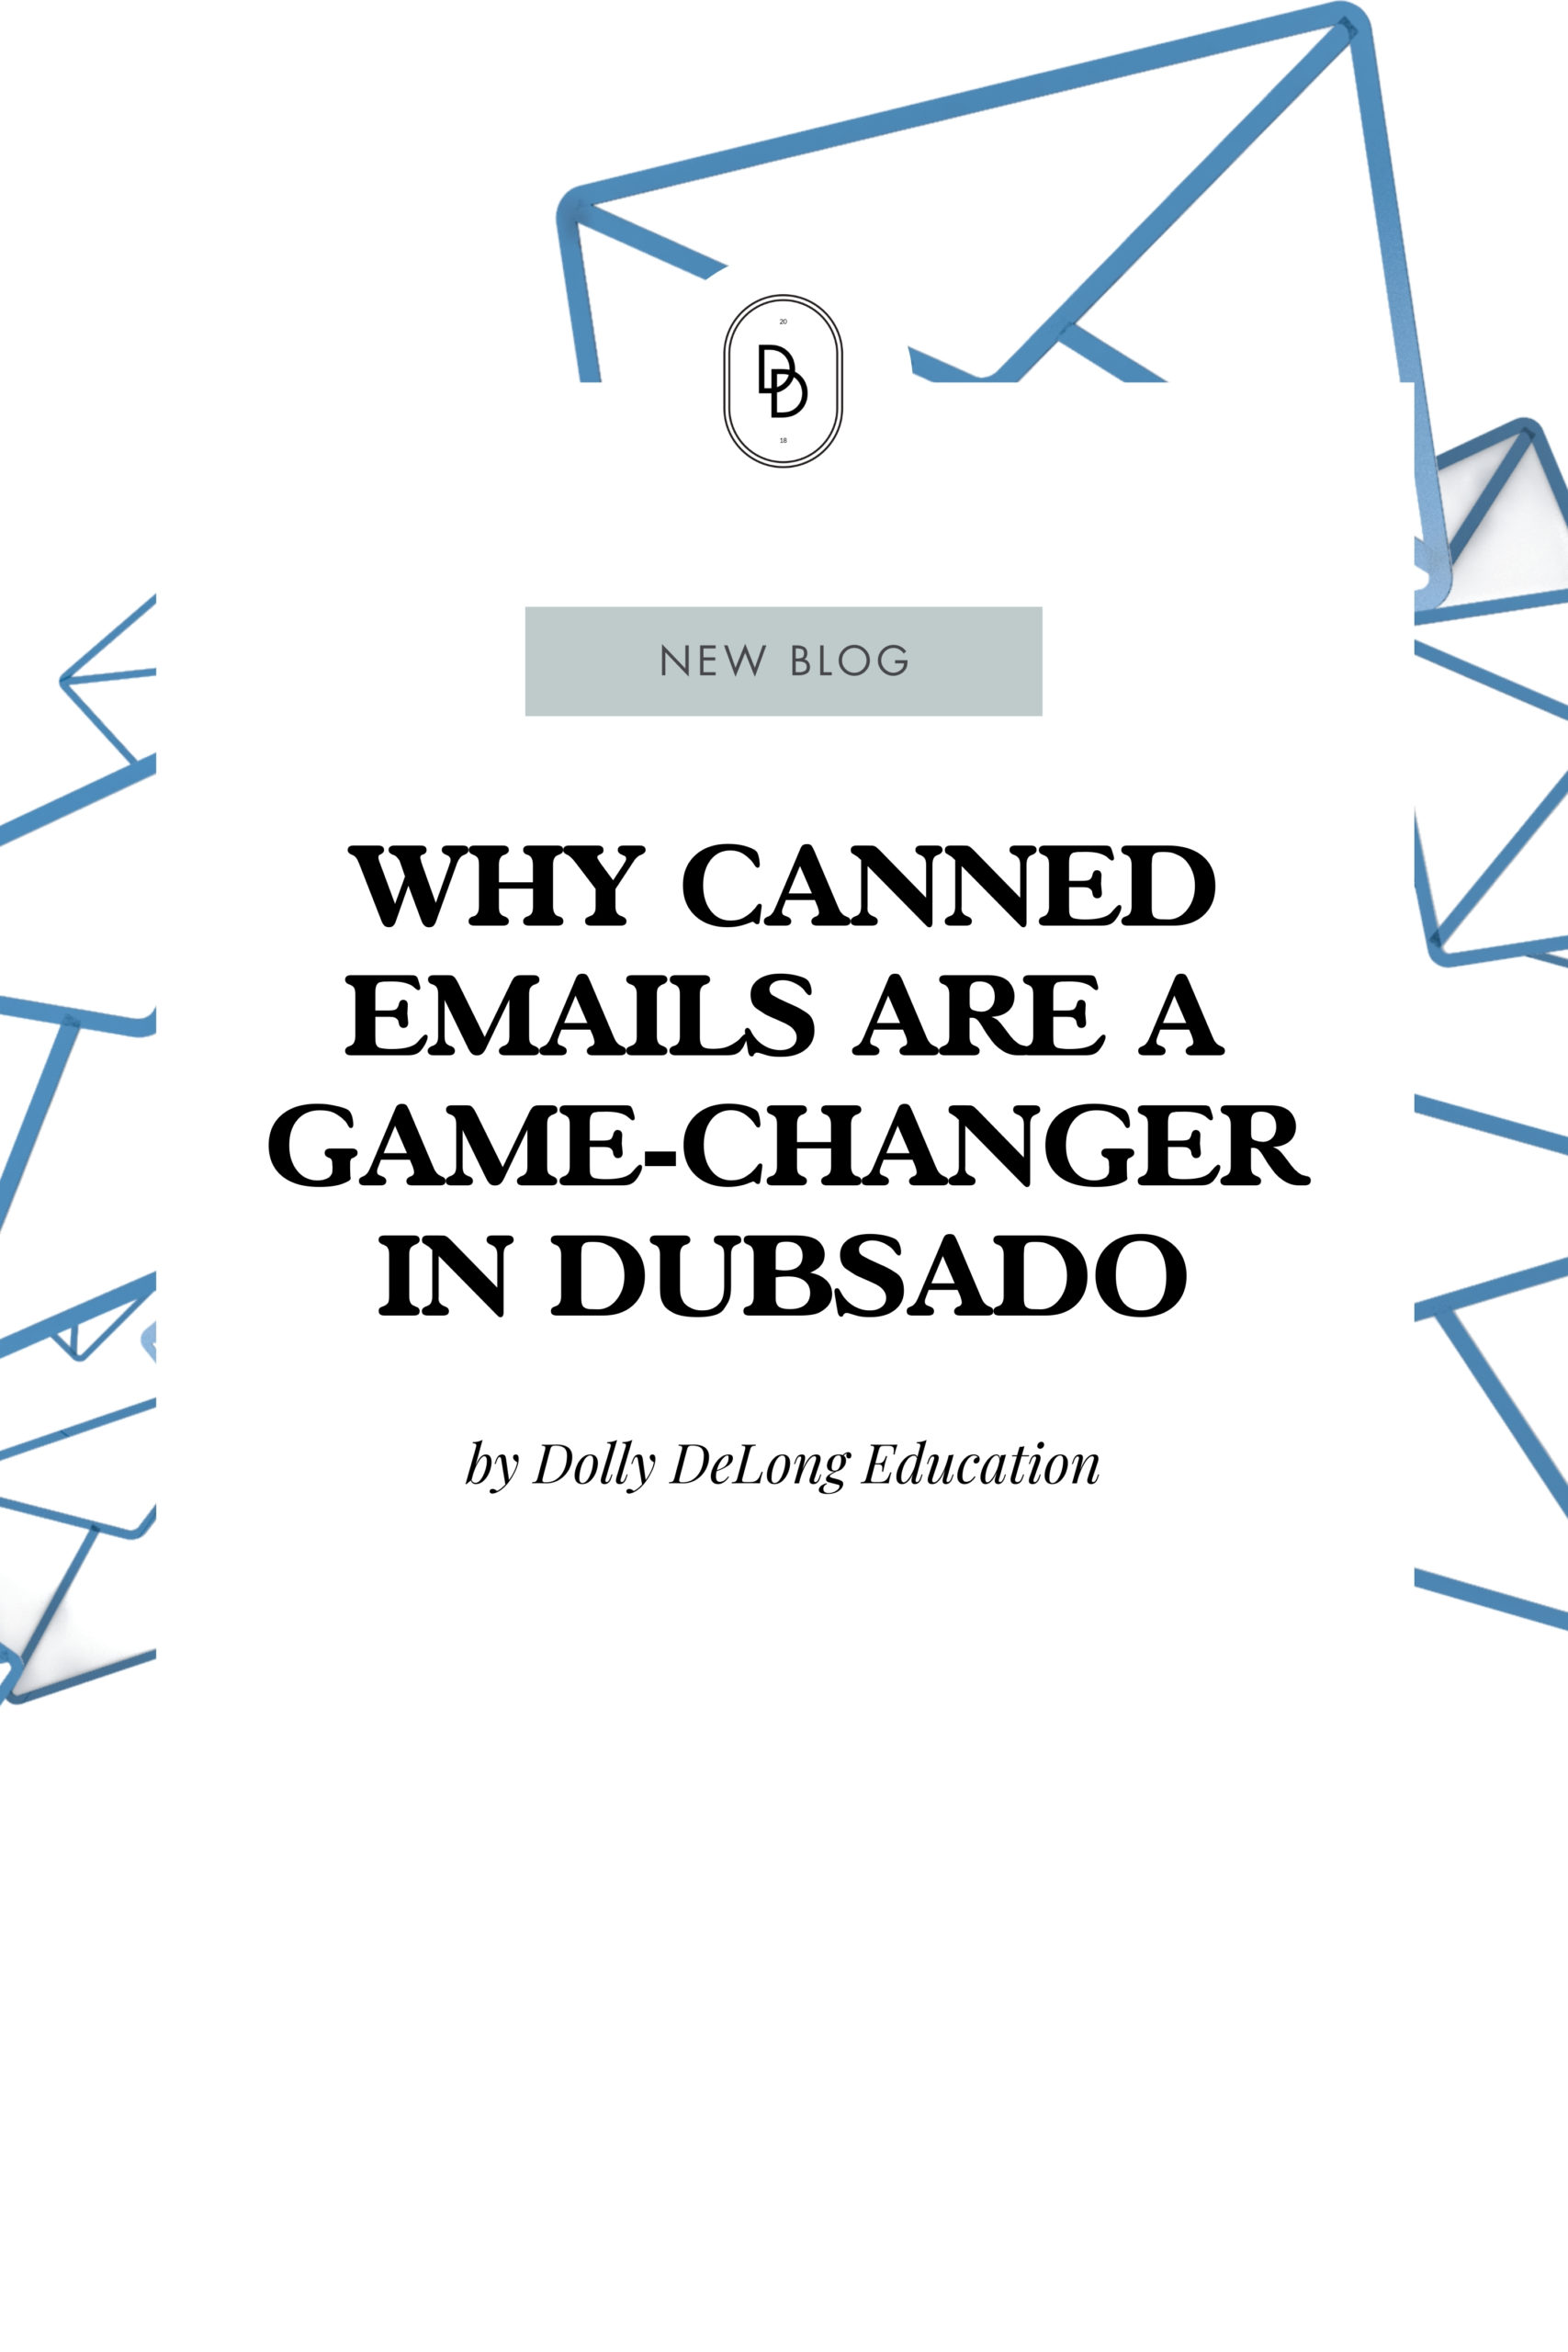 canned emails and Dubsado and how to use them as a small business owner